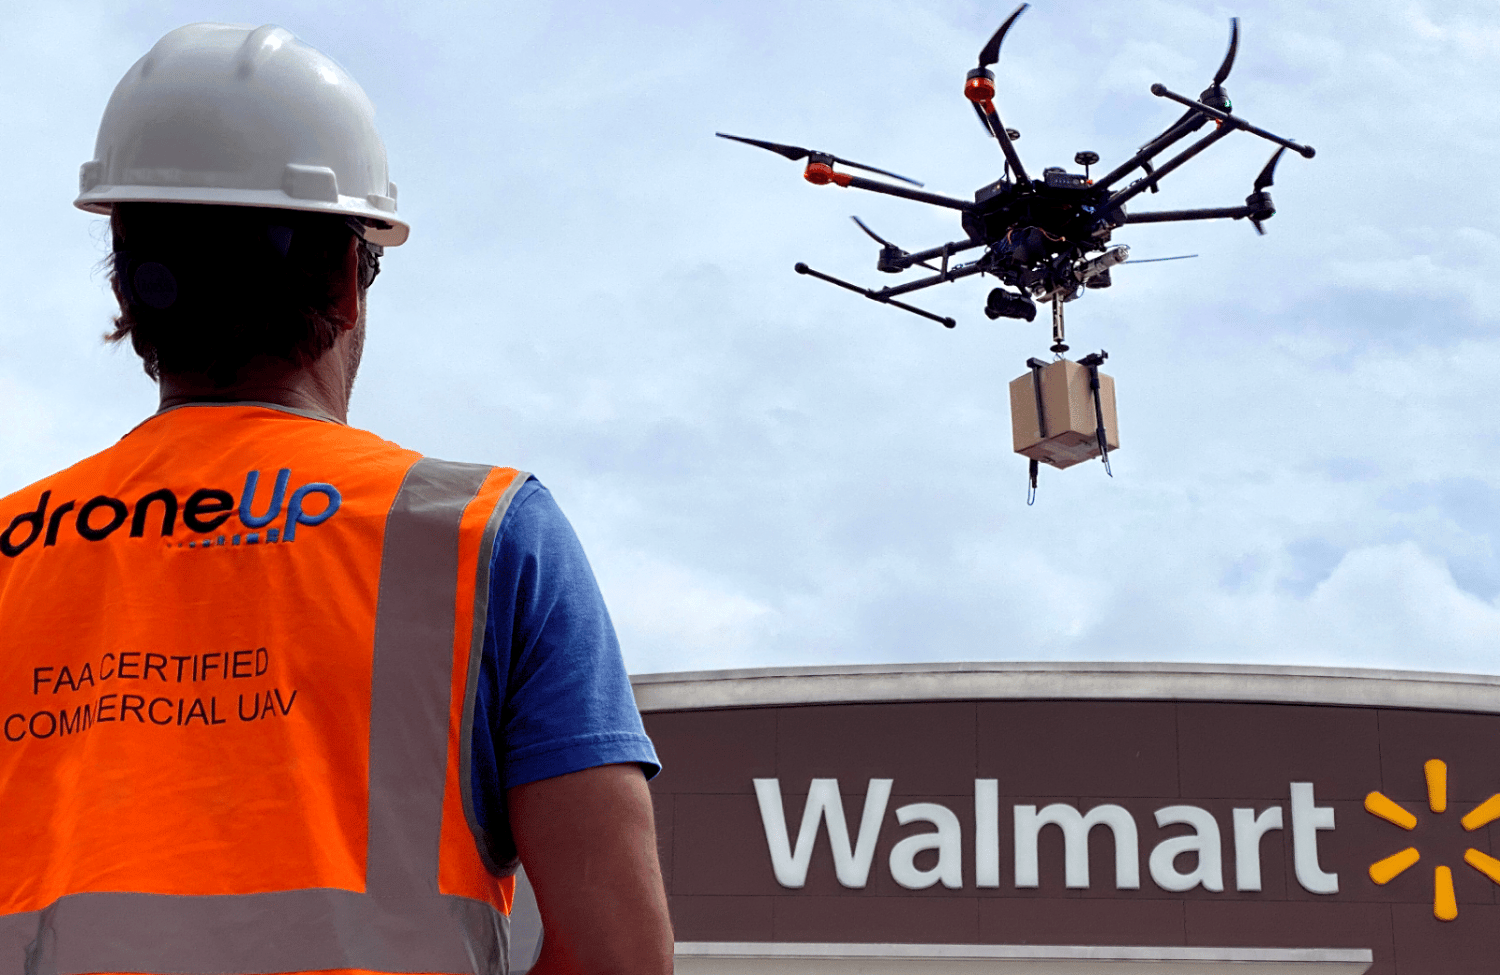 Walmart, Chick-fil-A, and 7-11 start drone delivery service